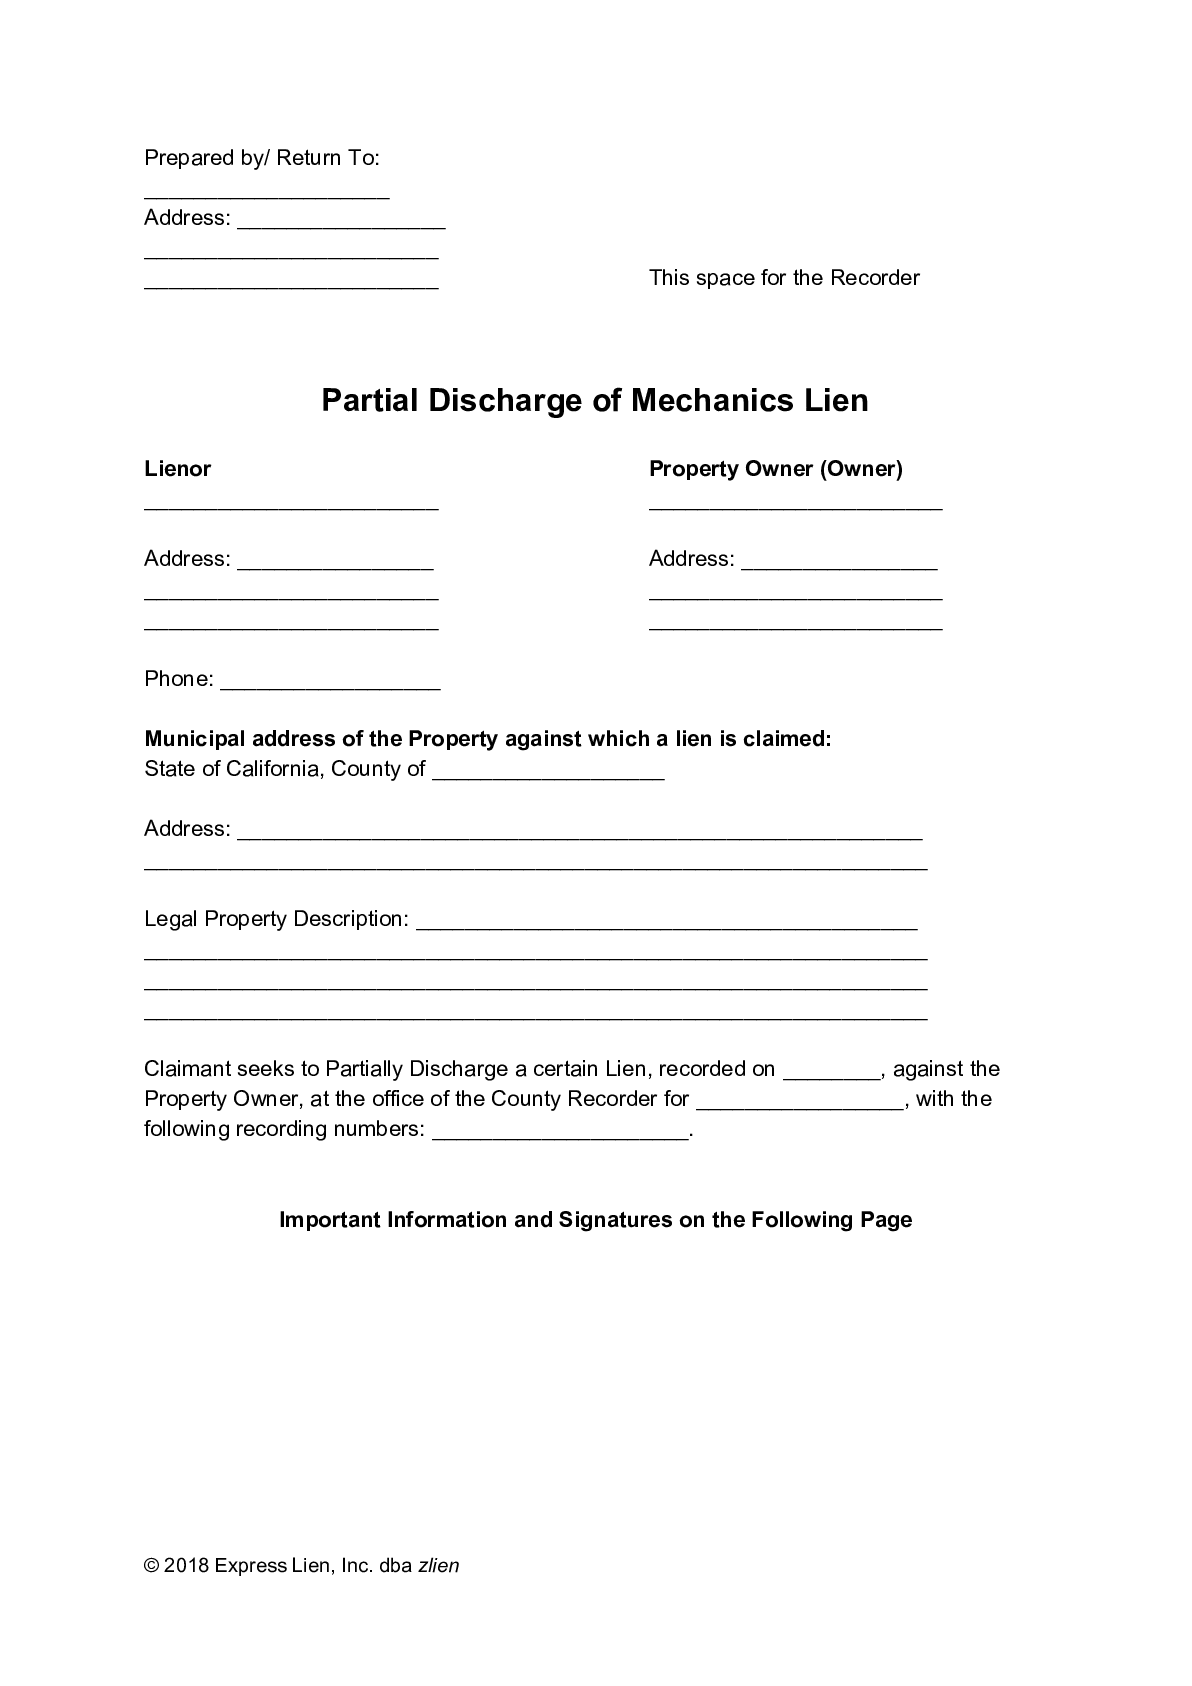 California Partial Discharge of Mechanics Lien Form - free from